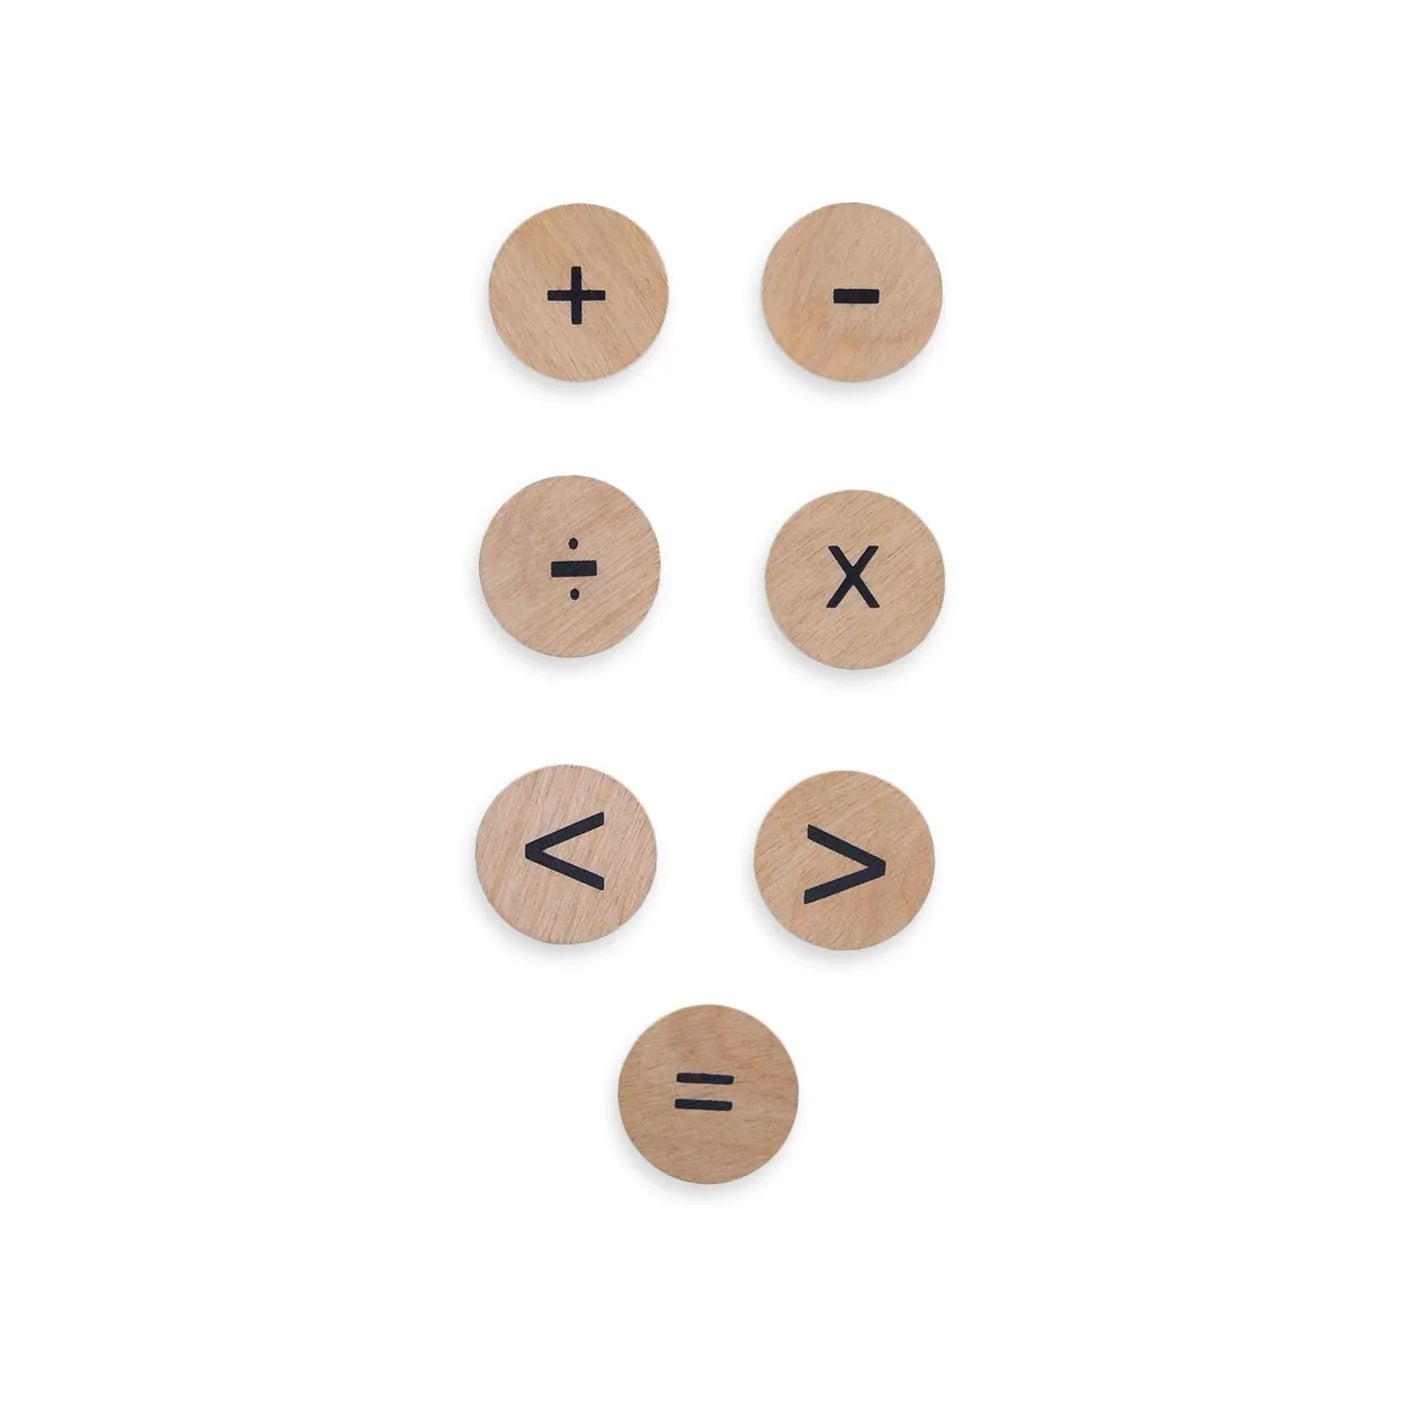 Buy Wooden Number Learning Coins - Mathematics Symbols - SkilloToys.com